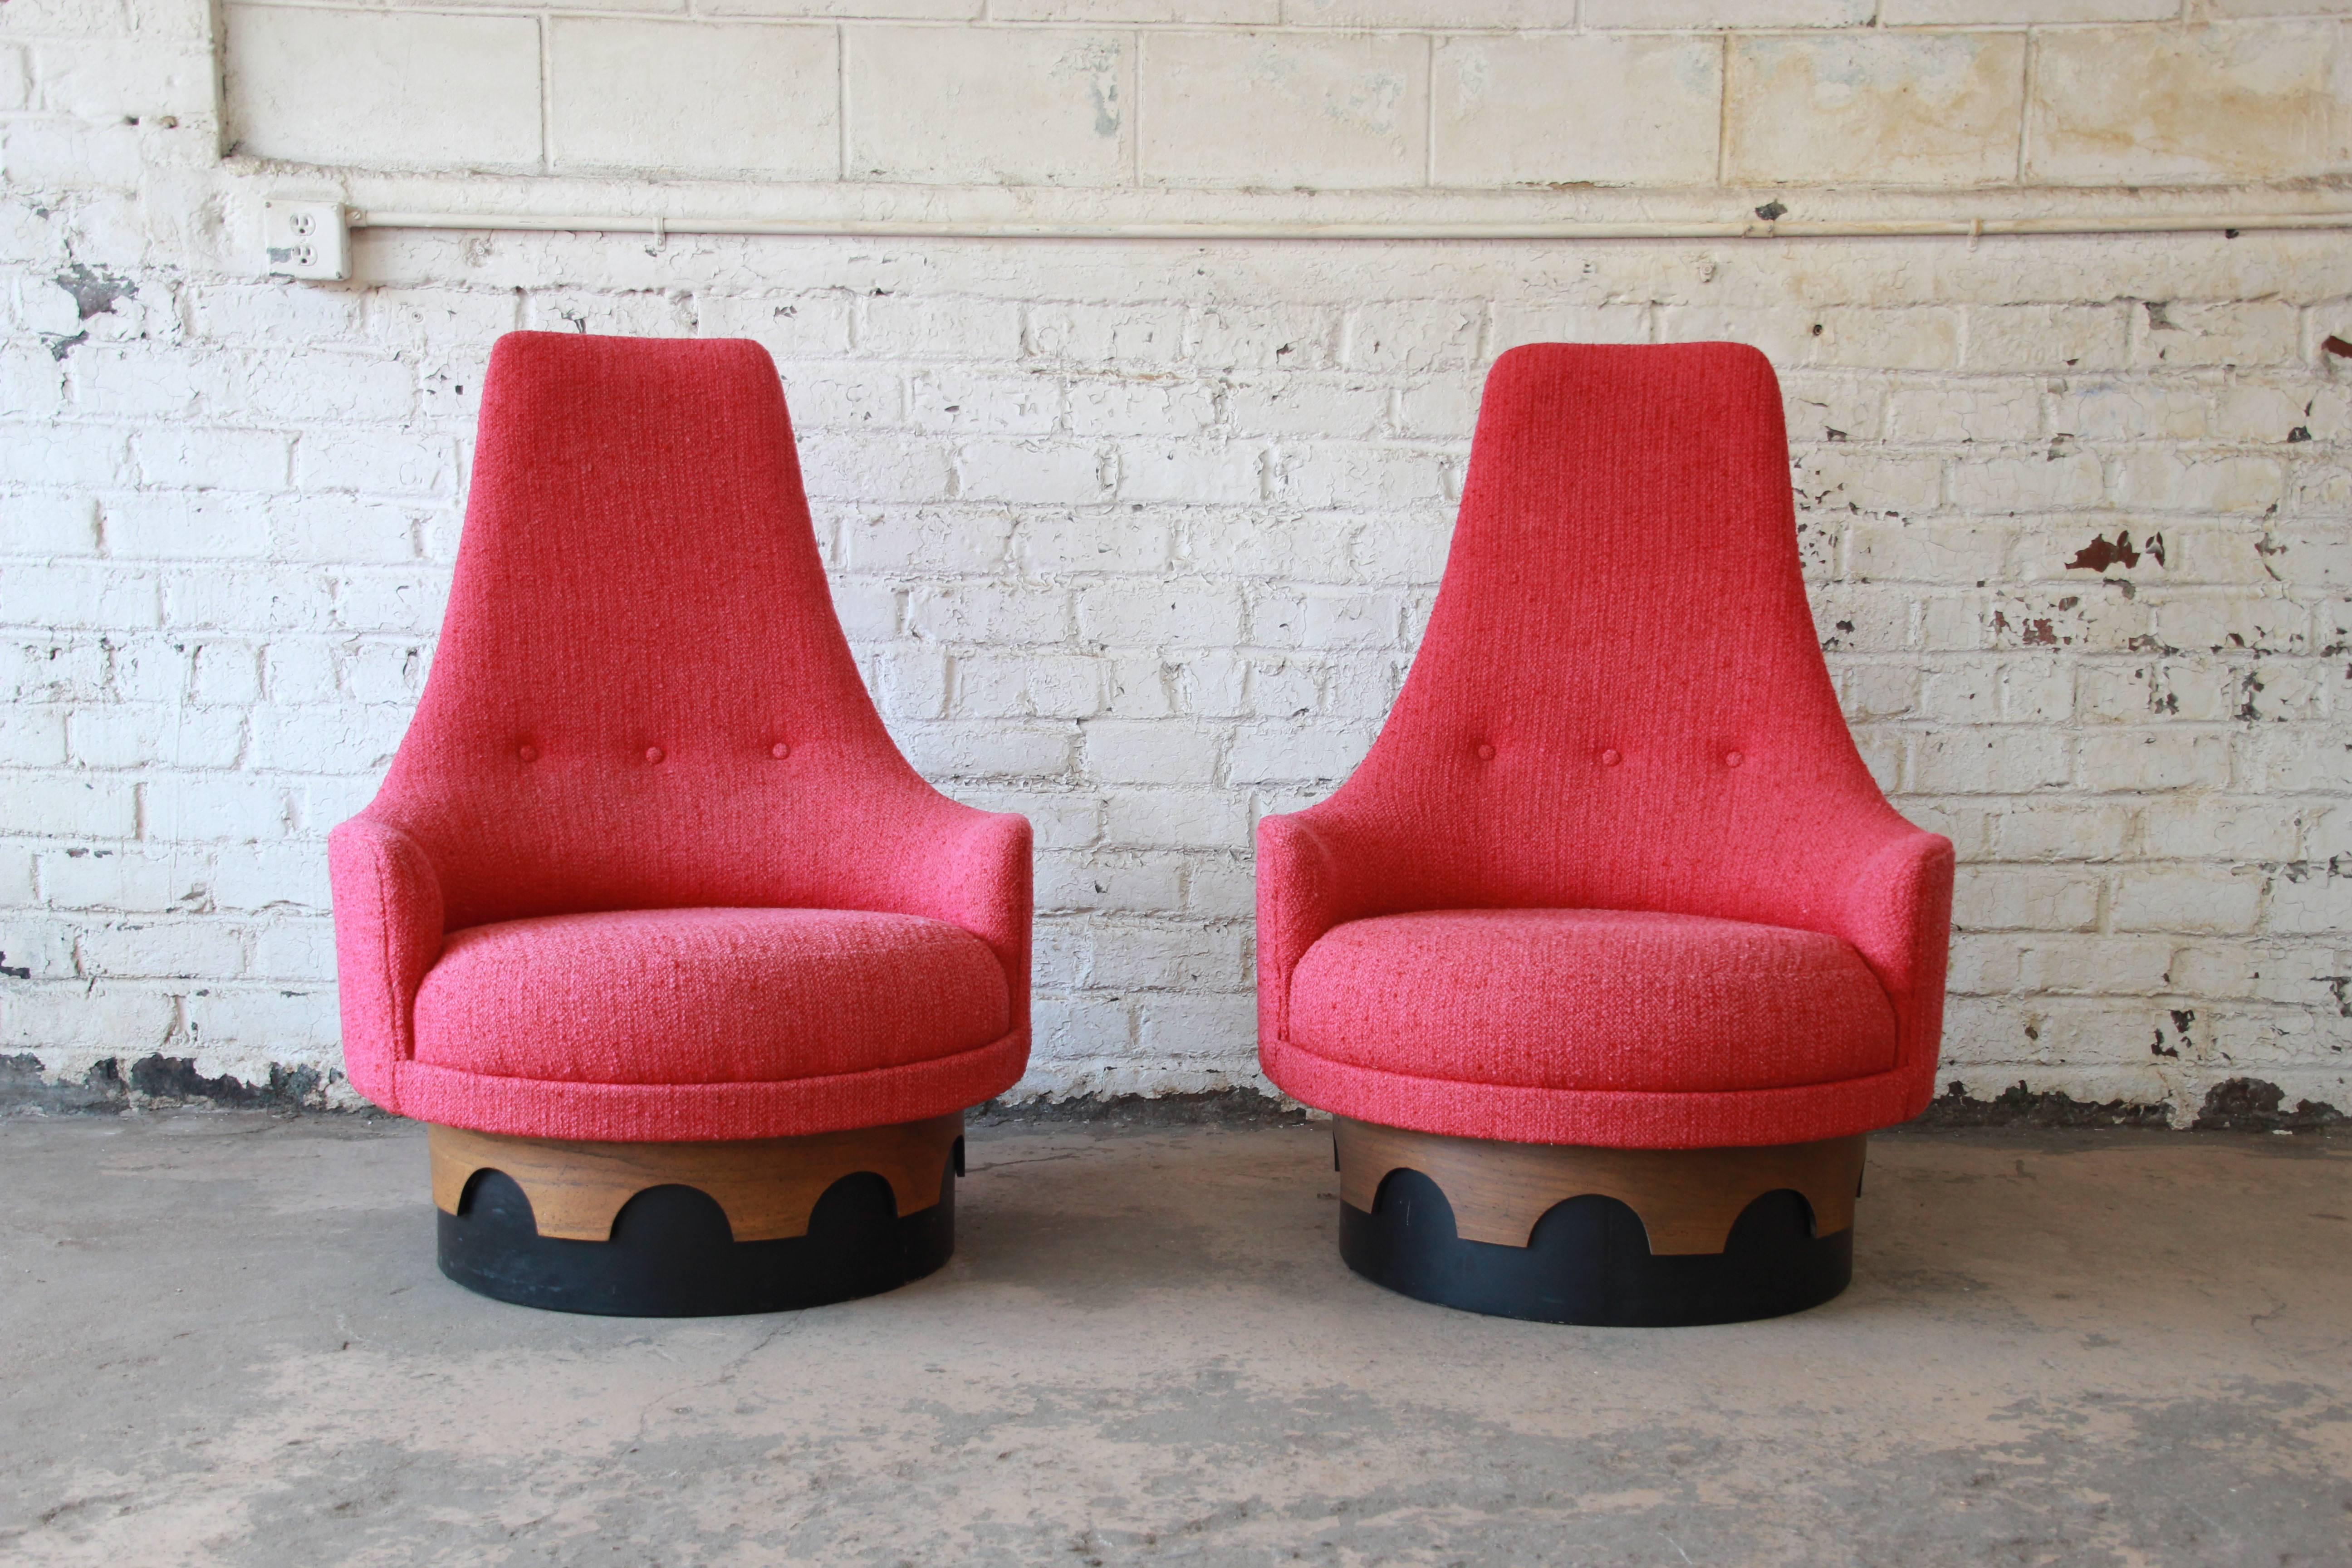 An outstanding original pair of 1960s high back swivel chairs designed by Adrian Pearsall for his “Strictly Spanish” collection for Craft Associates. The chairs feature original hot pink tweed upholstery and a plinth base with two-toned design that